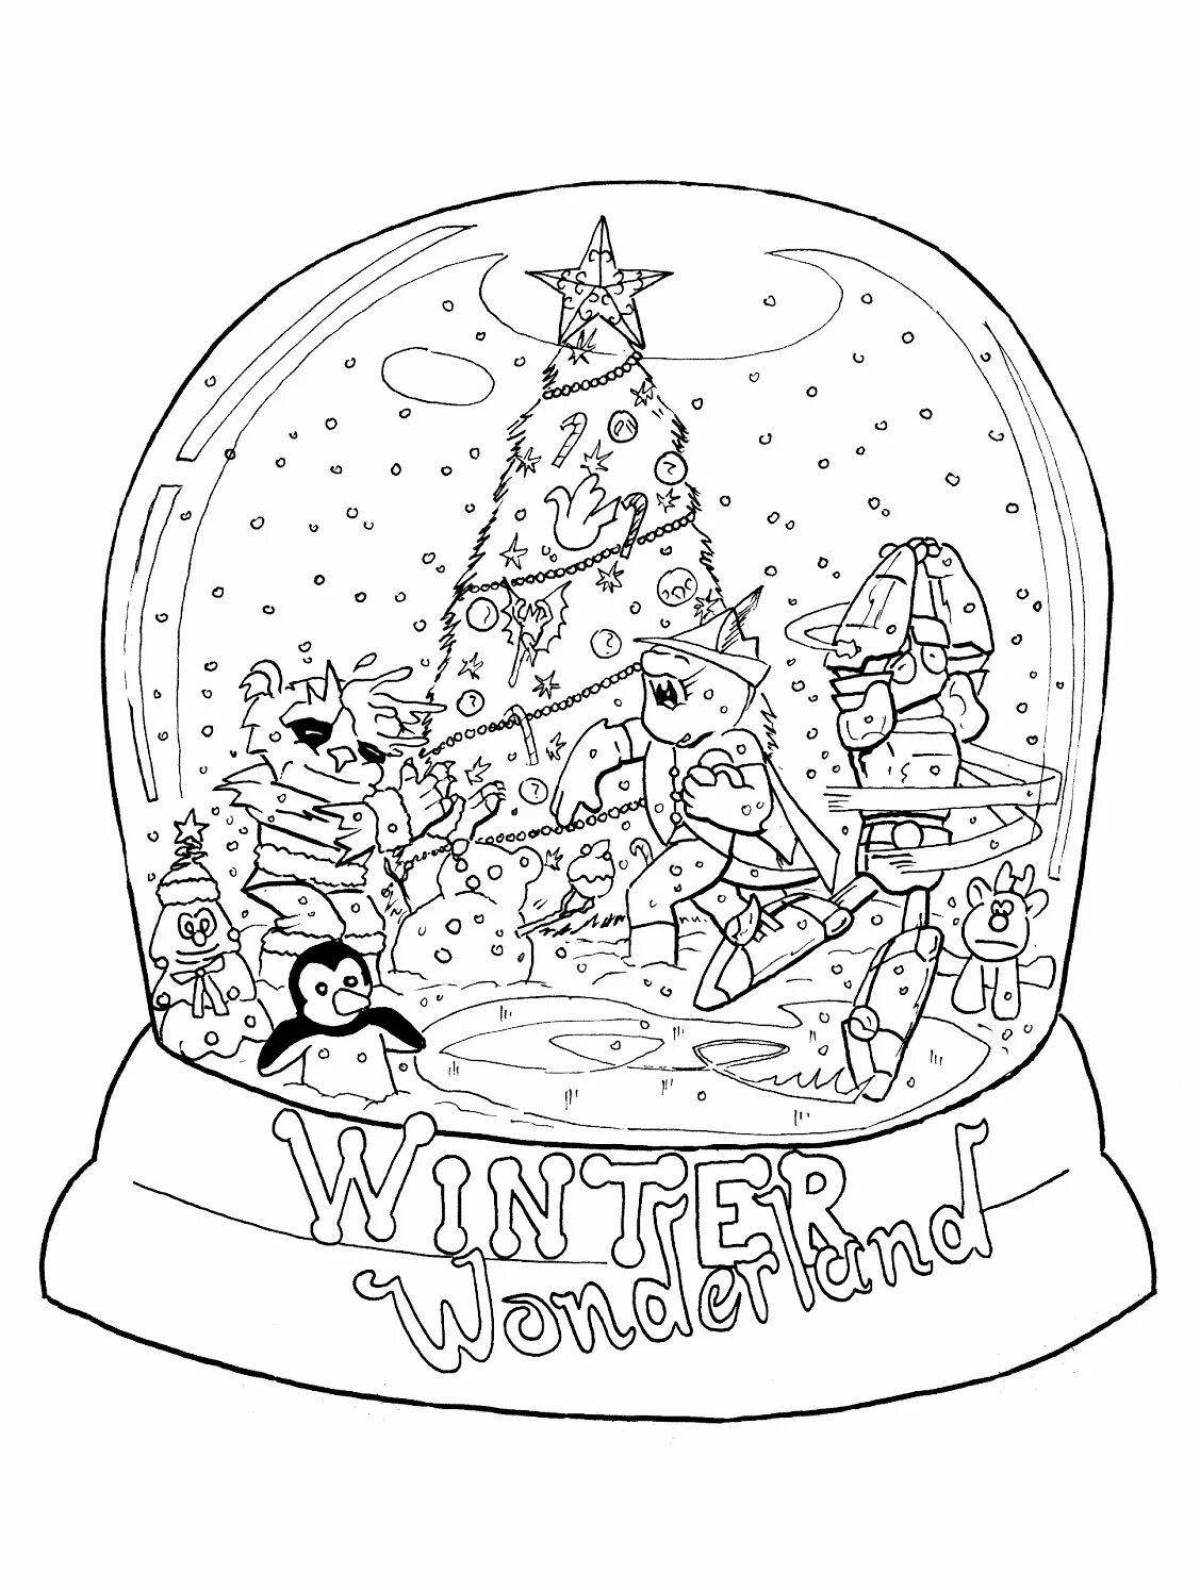 Colorful snowball coloring page